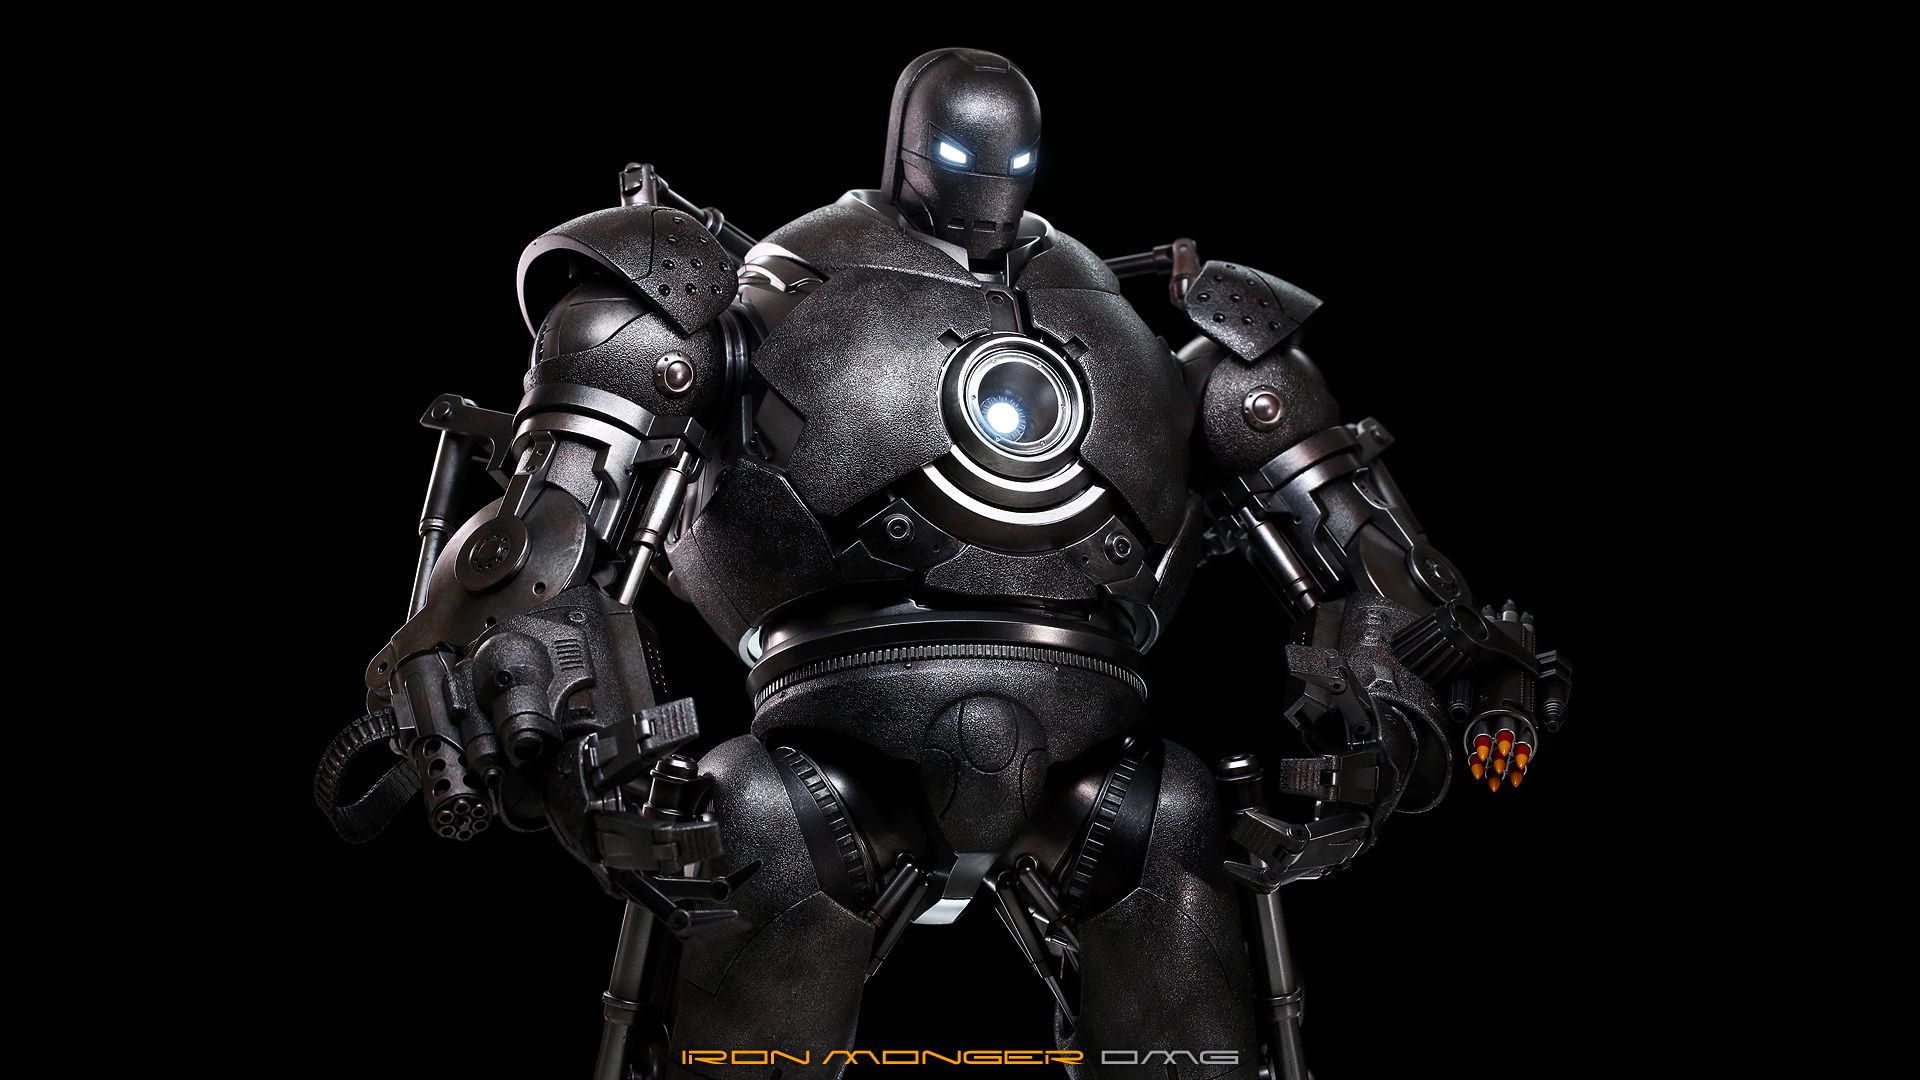 [Hot Toys] Iron Man: Iron Monger 1/6th scale - Limited Edition Collectible Figurine - Página 9 IronMongerHD101_zps79fbb071